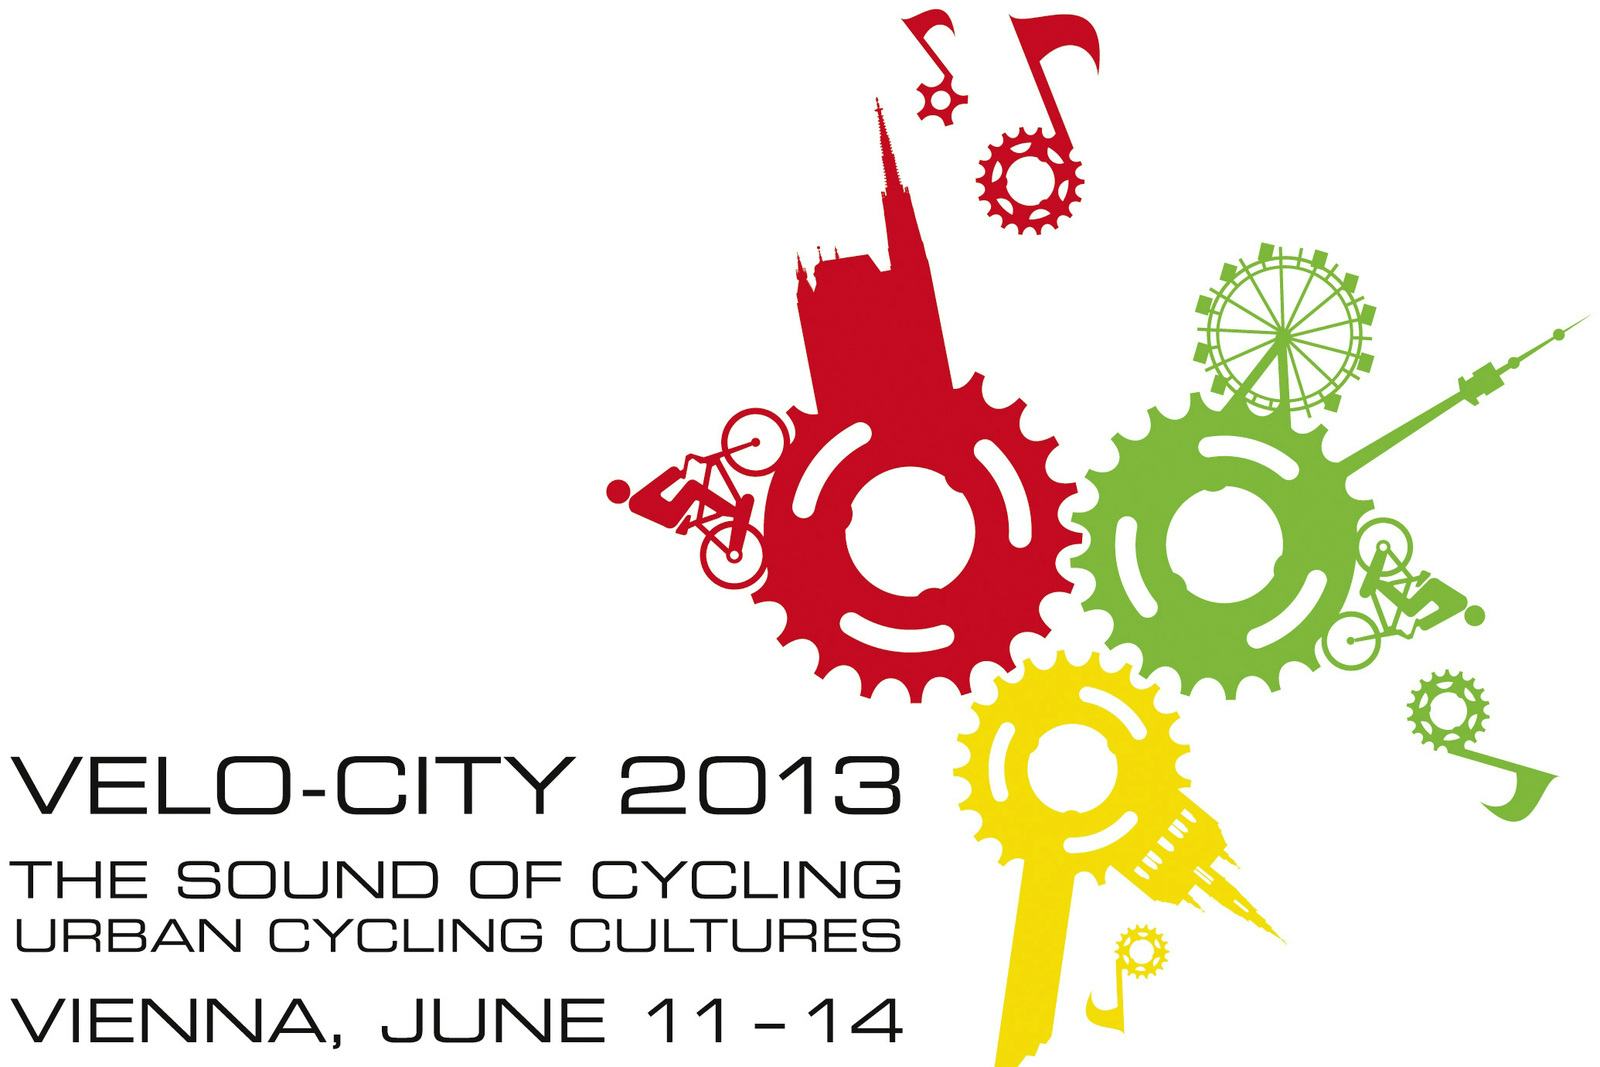 Vienna has decided to make 2013 the year of cycling. Highlight will be the Velo-city Conference organised by the European Cyclists' Federation (ECF) and the City of Vienna from 11 to 14 June.
